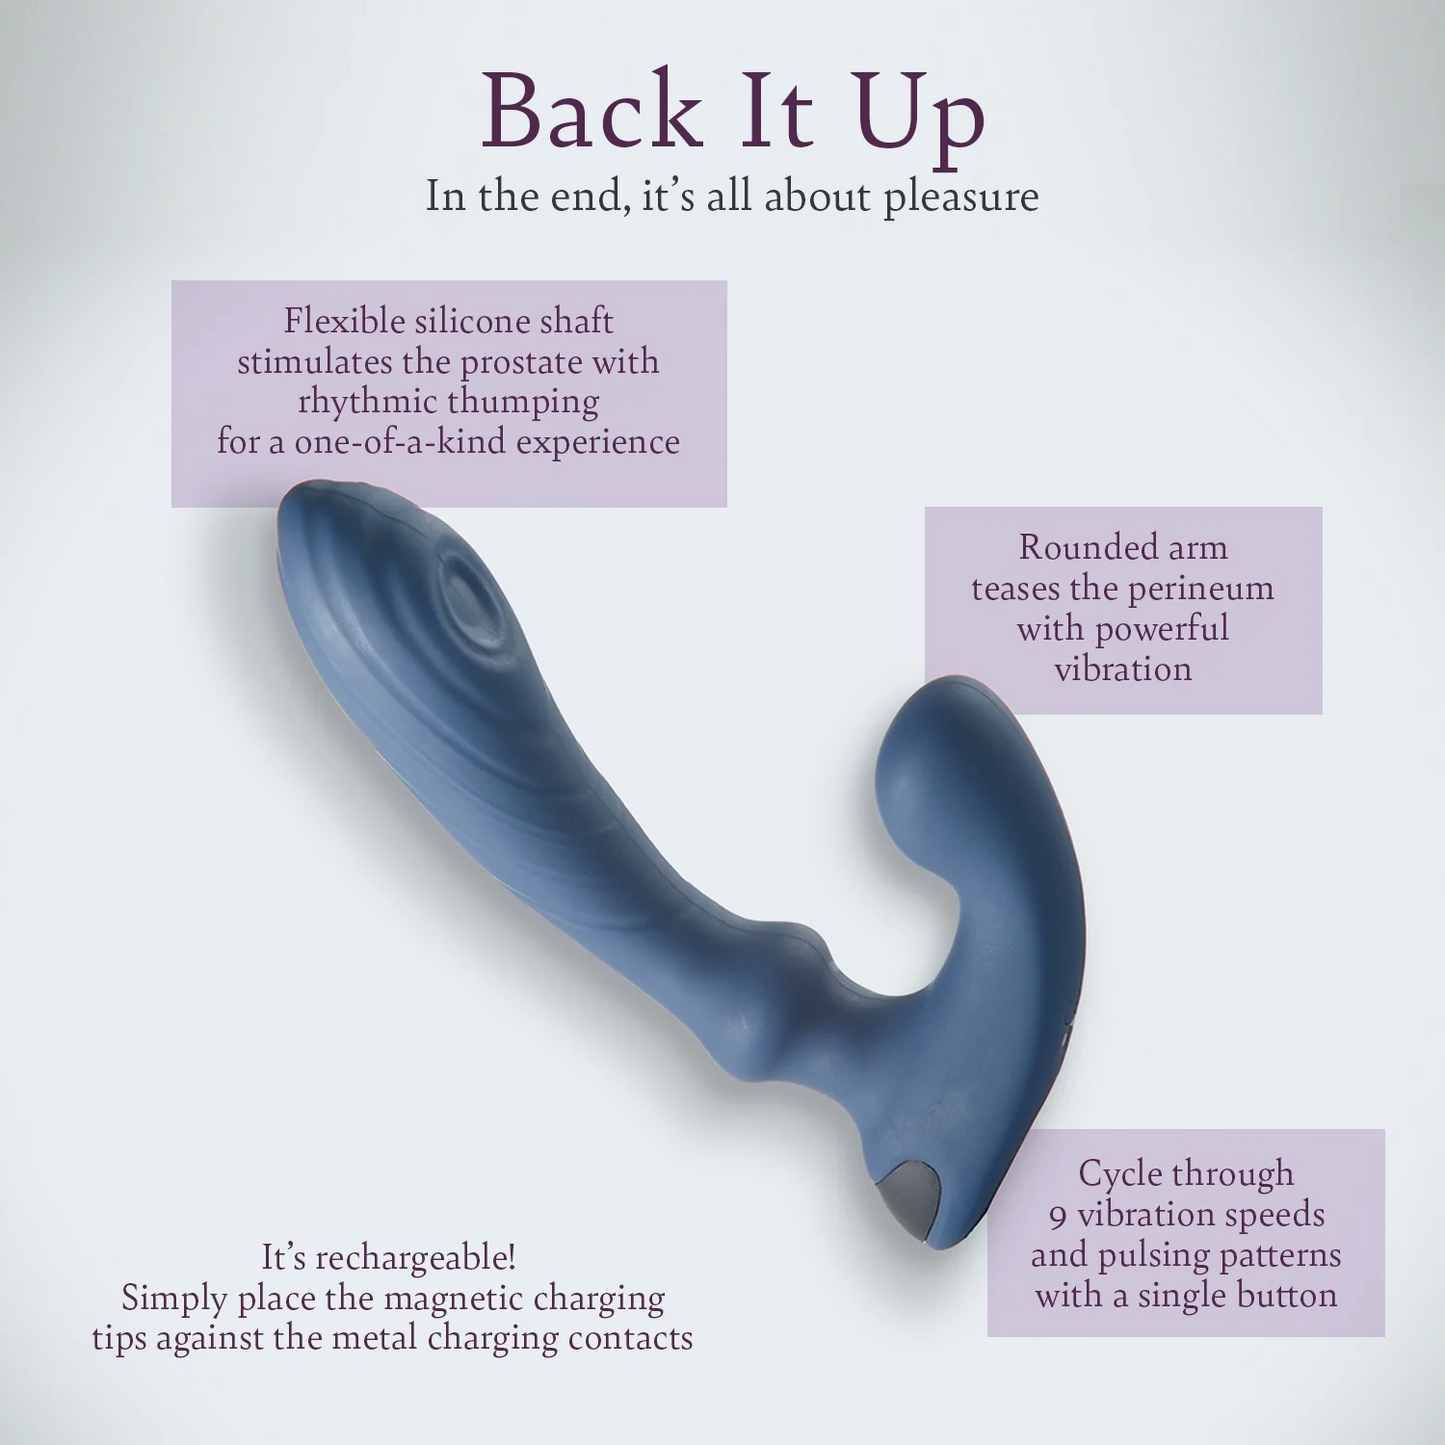 Back It Up: Prostate and Perineum vibrator